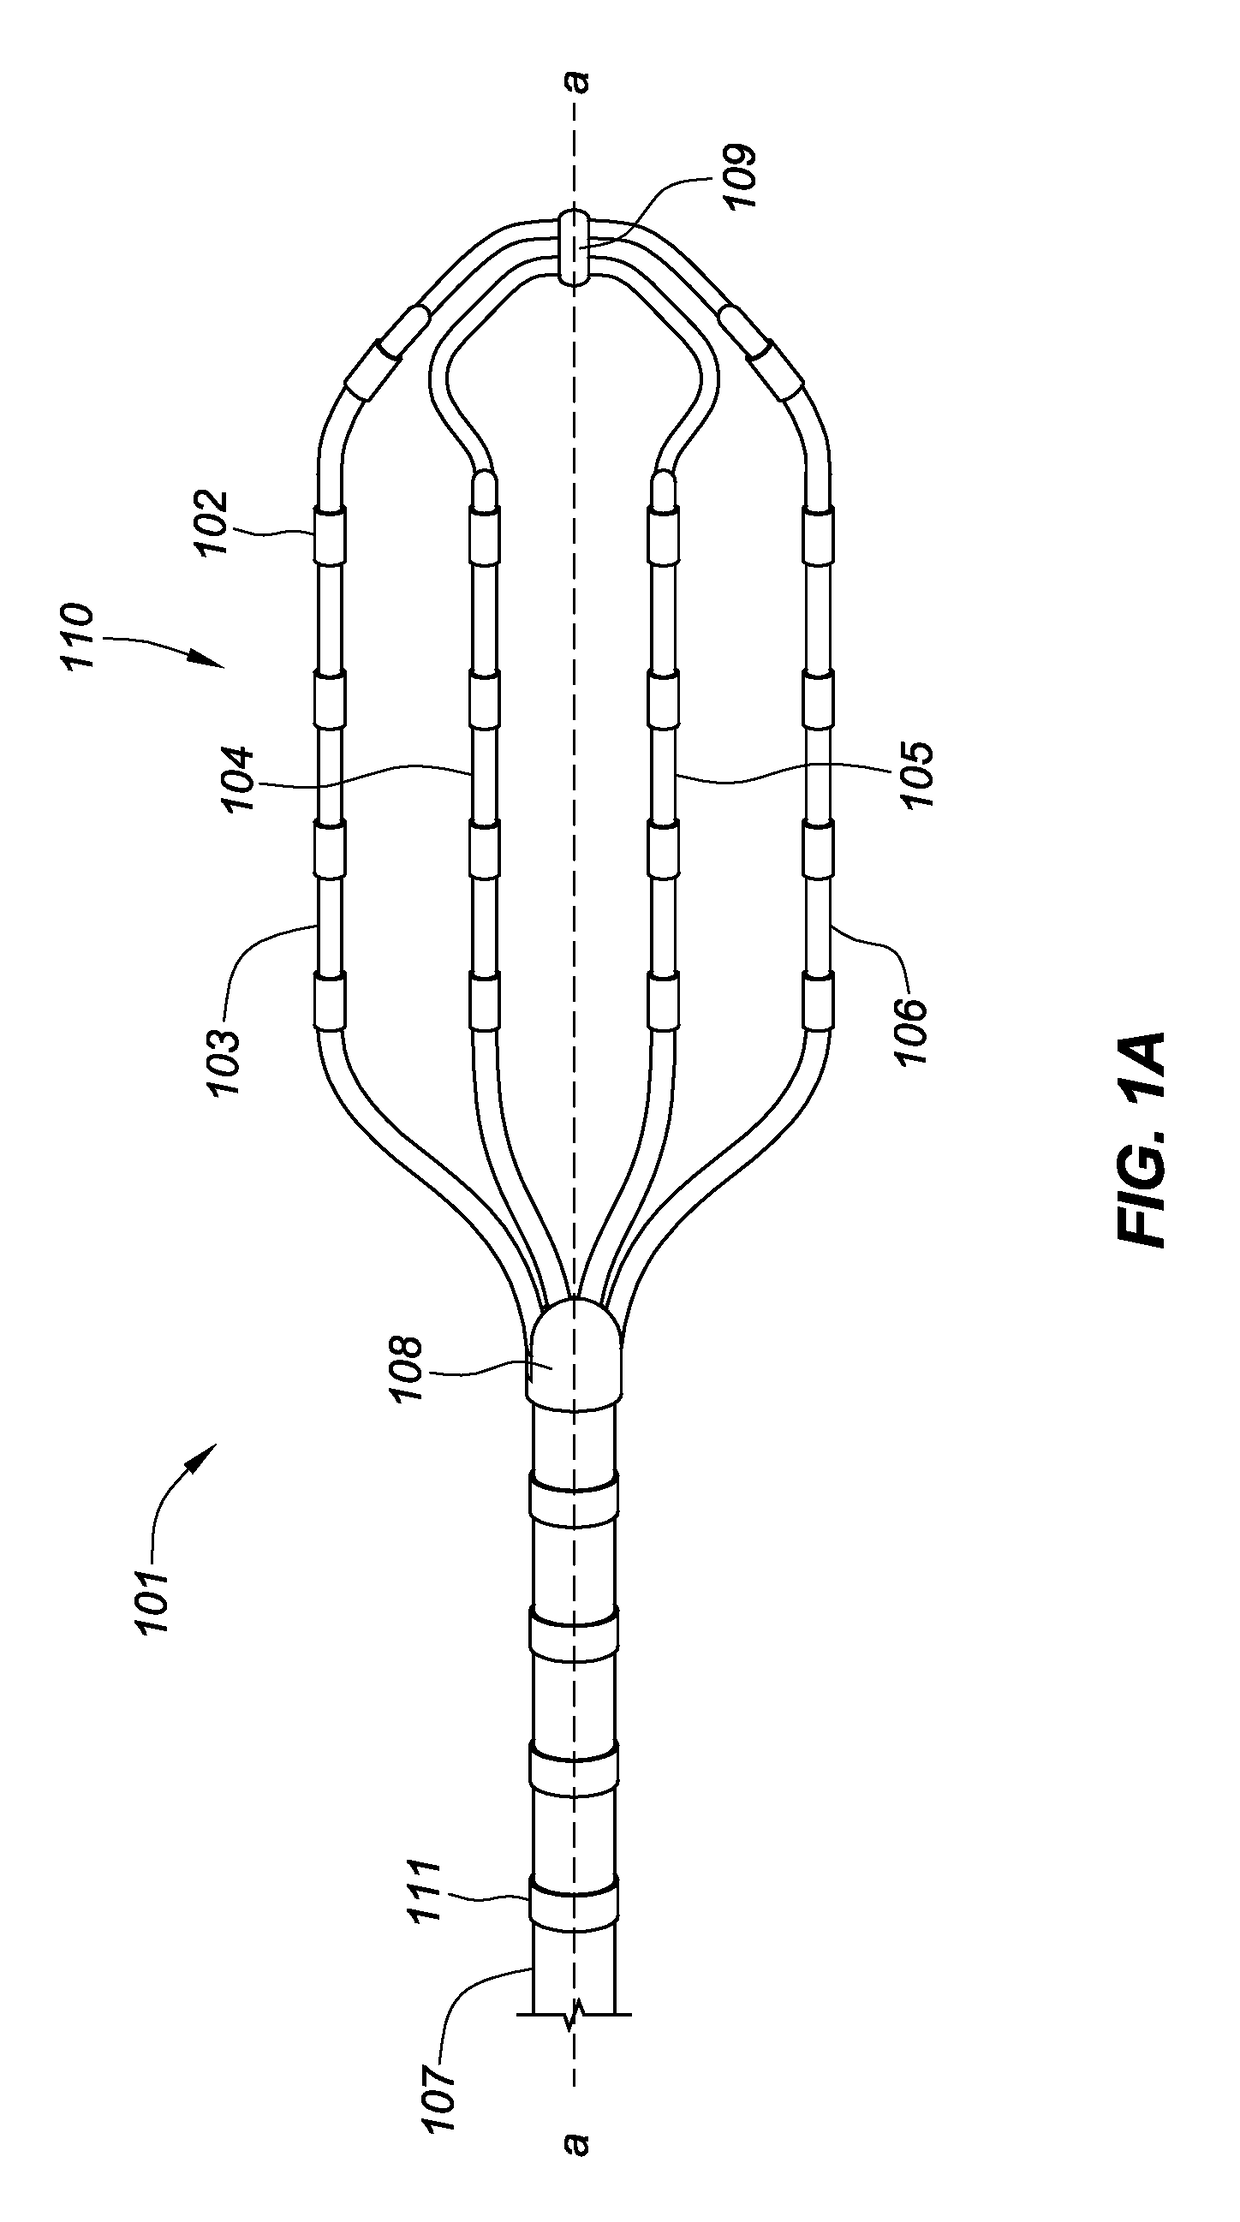 High density electrode mapping catheter